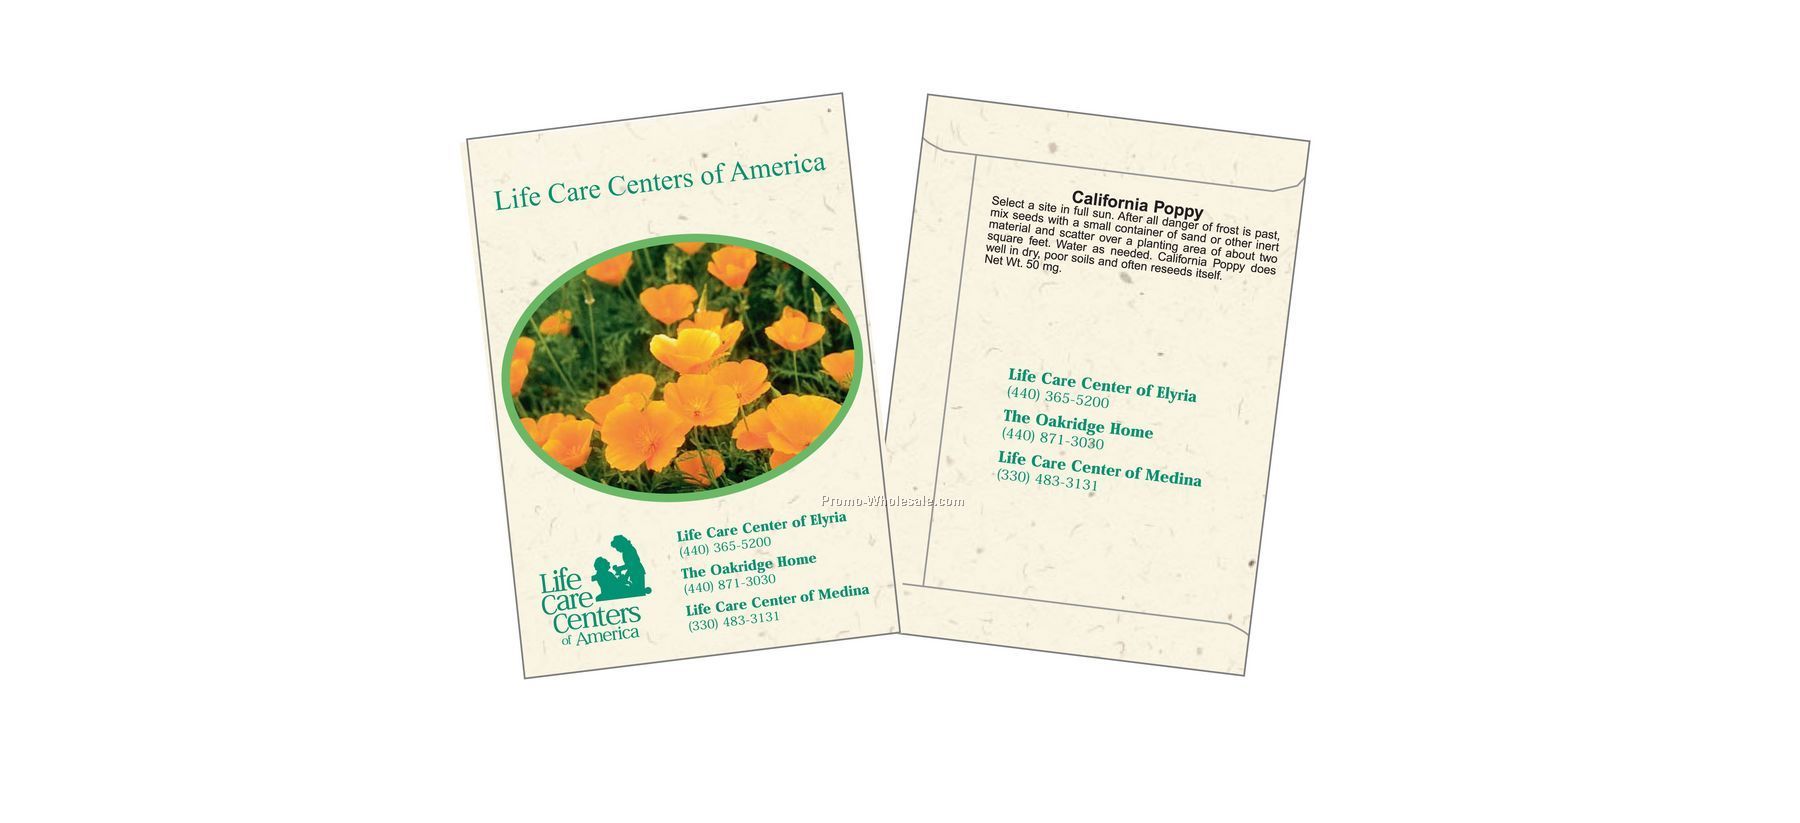 3-1/4"x4-1/2" California Poppy Flower Seed Packet (1 Color)